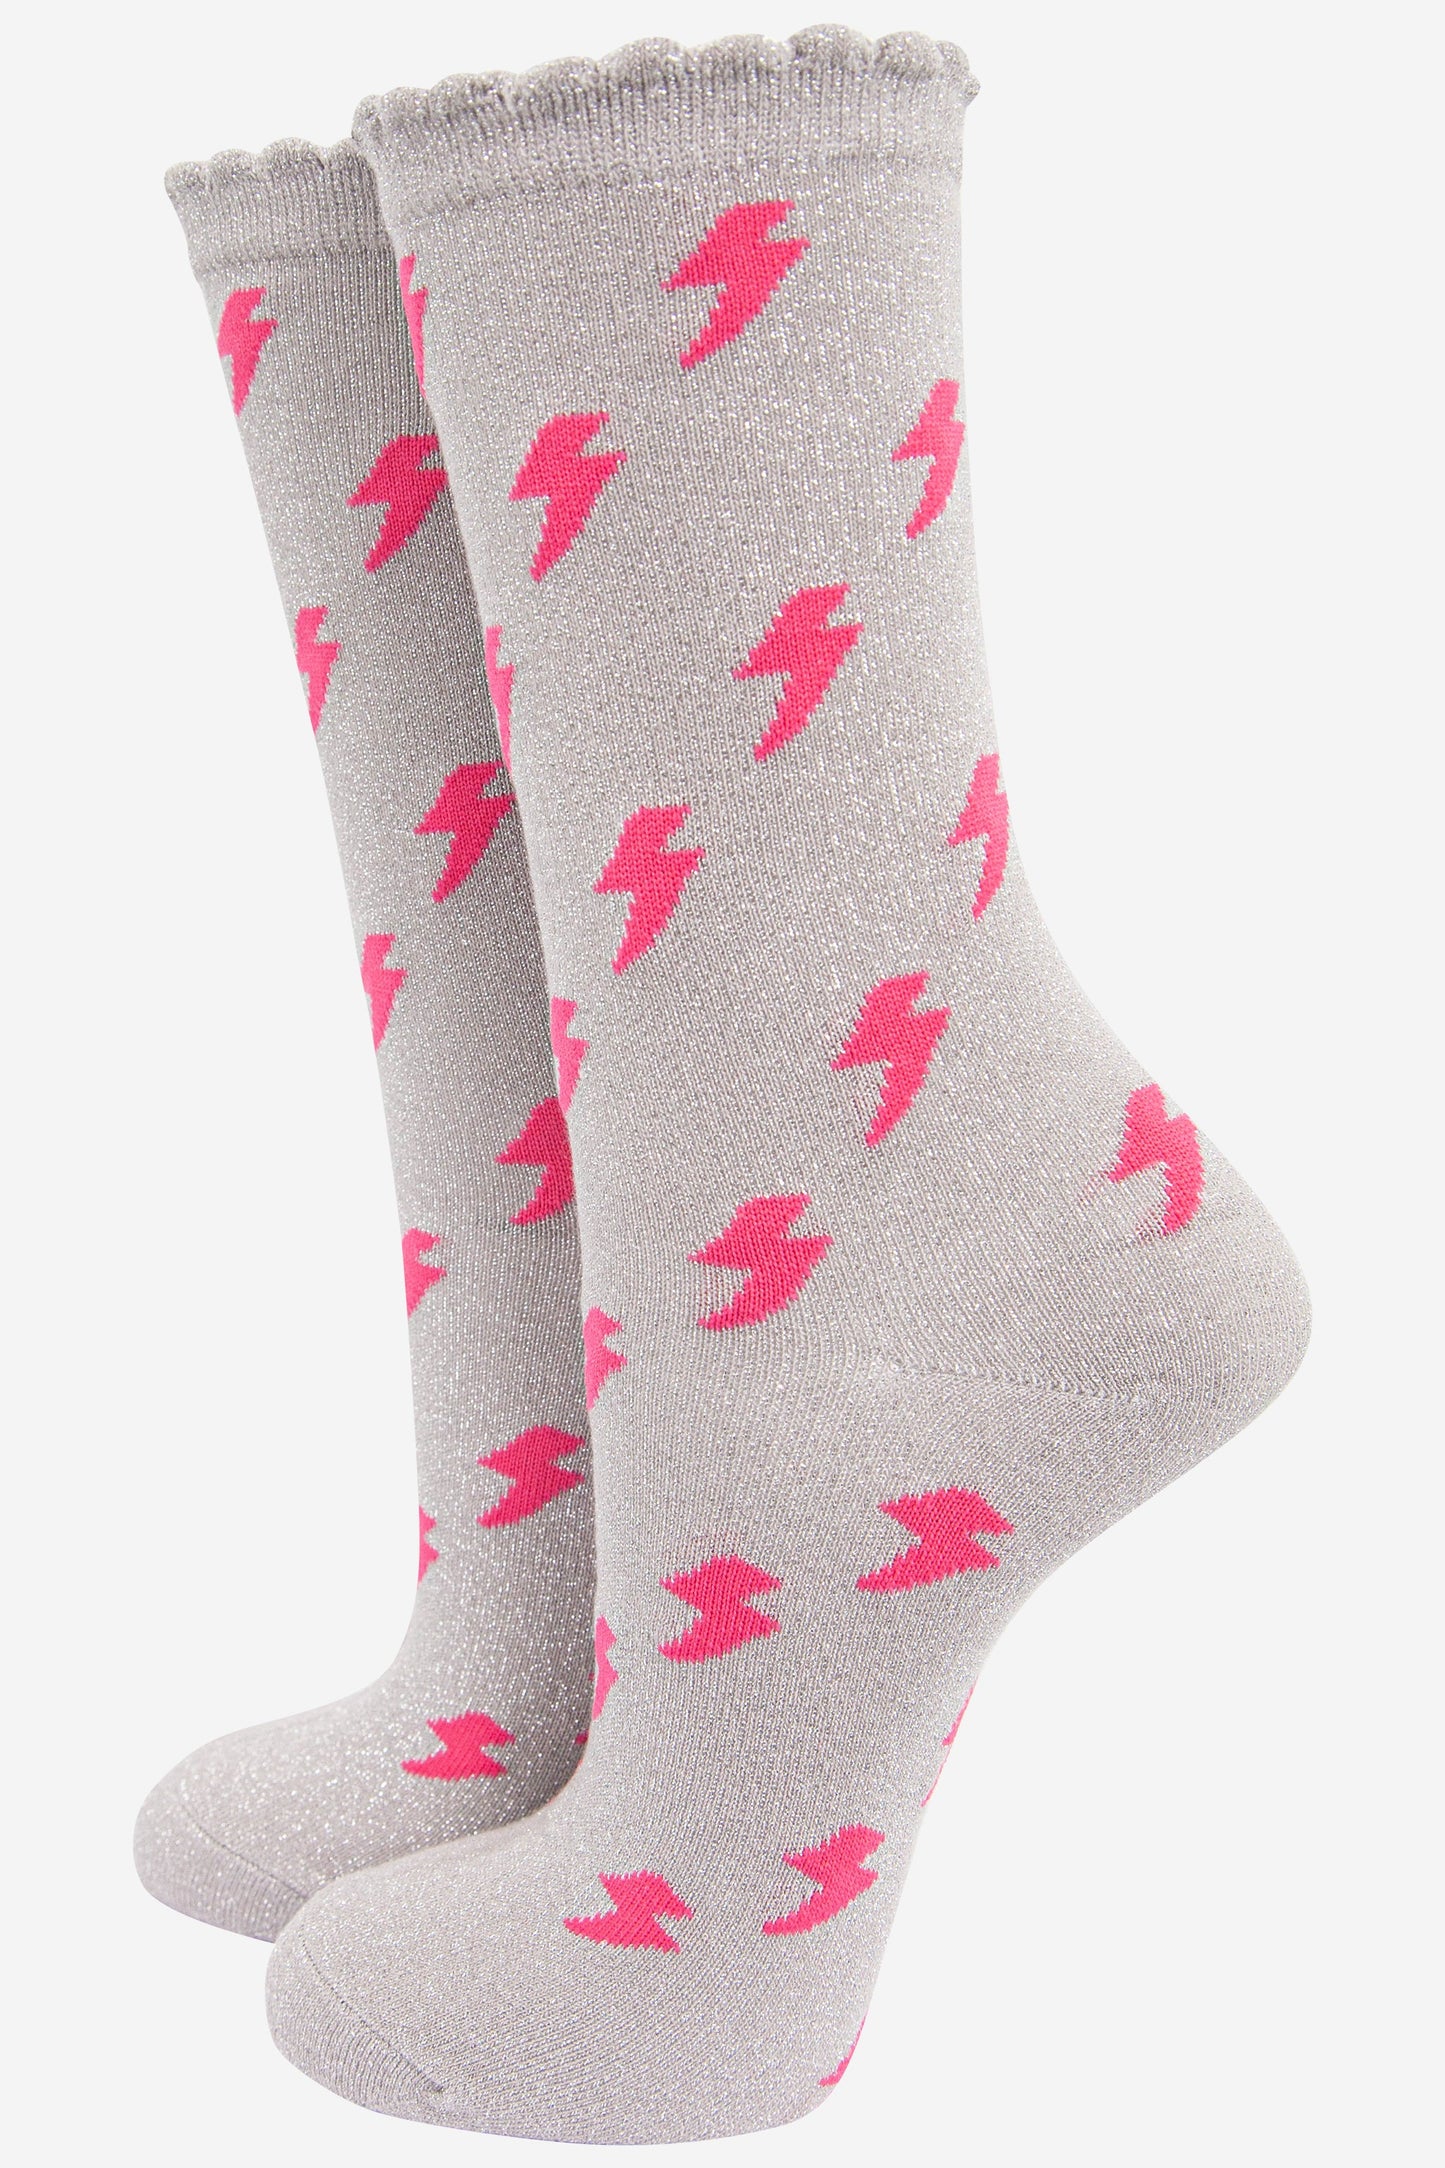 womens grey glitter socks with an all over pink lightning bolt pattern and glitter sparkle